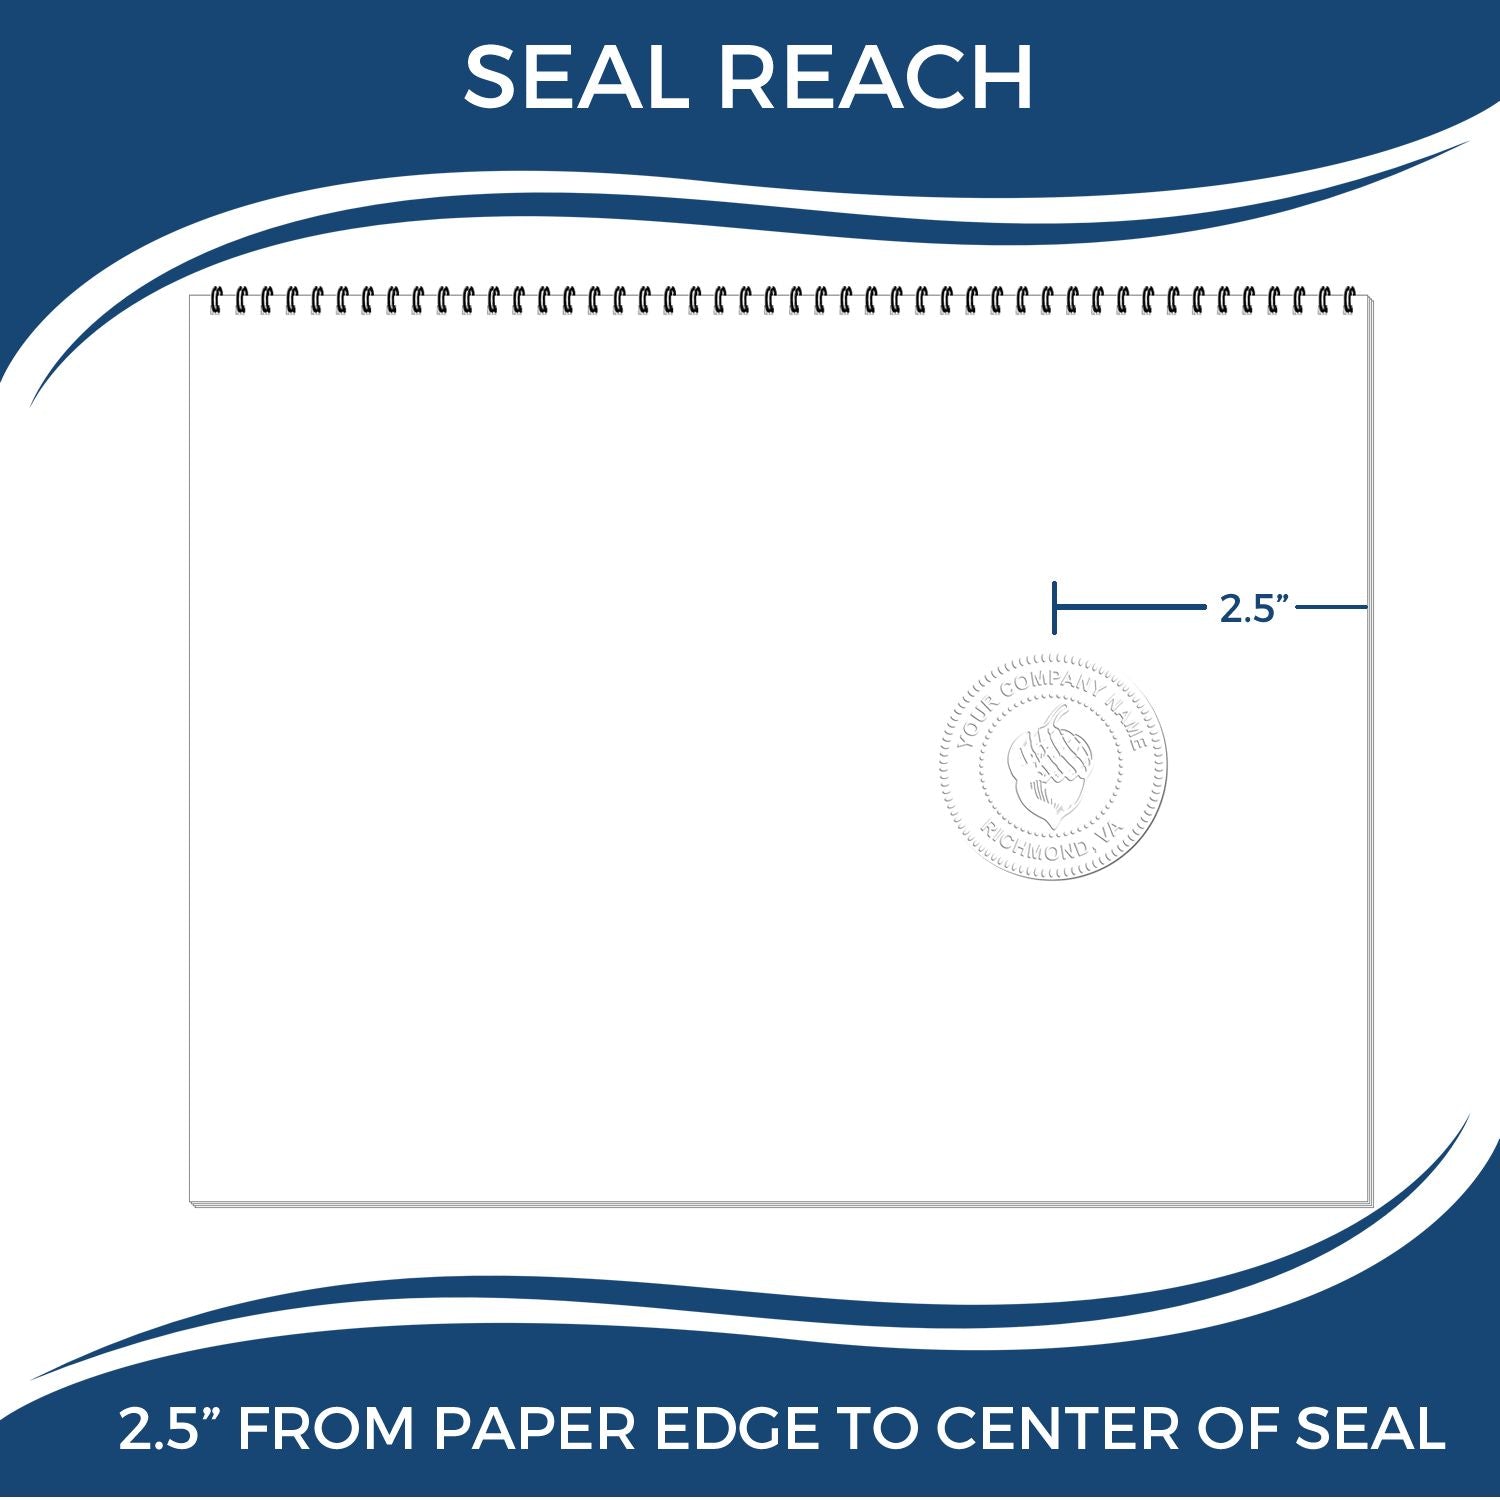 An infographic showing the seal reach which is represented by a ruler and a miniature seal image of the Long Reach Michigan Geology Seal